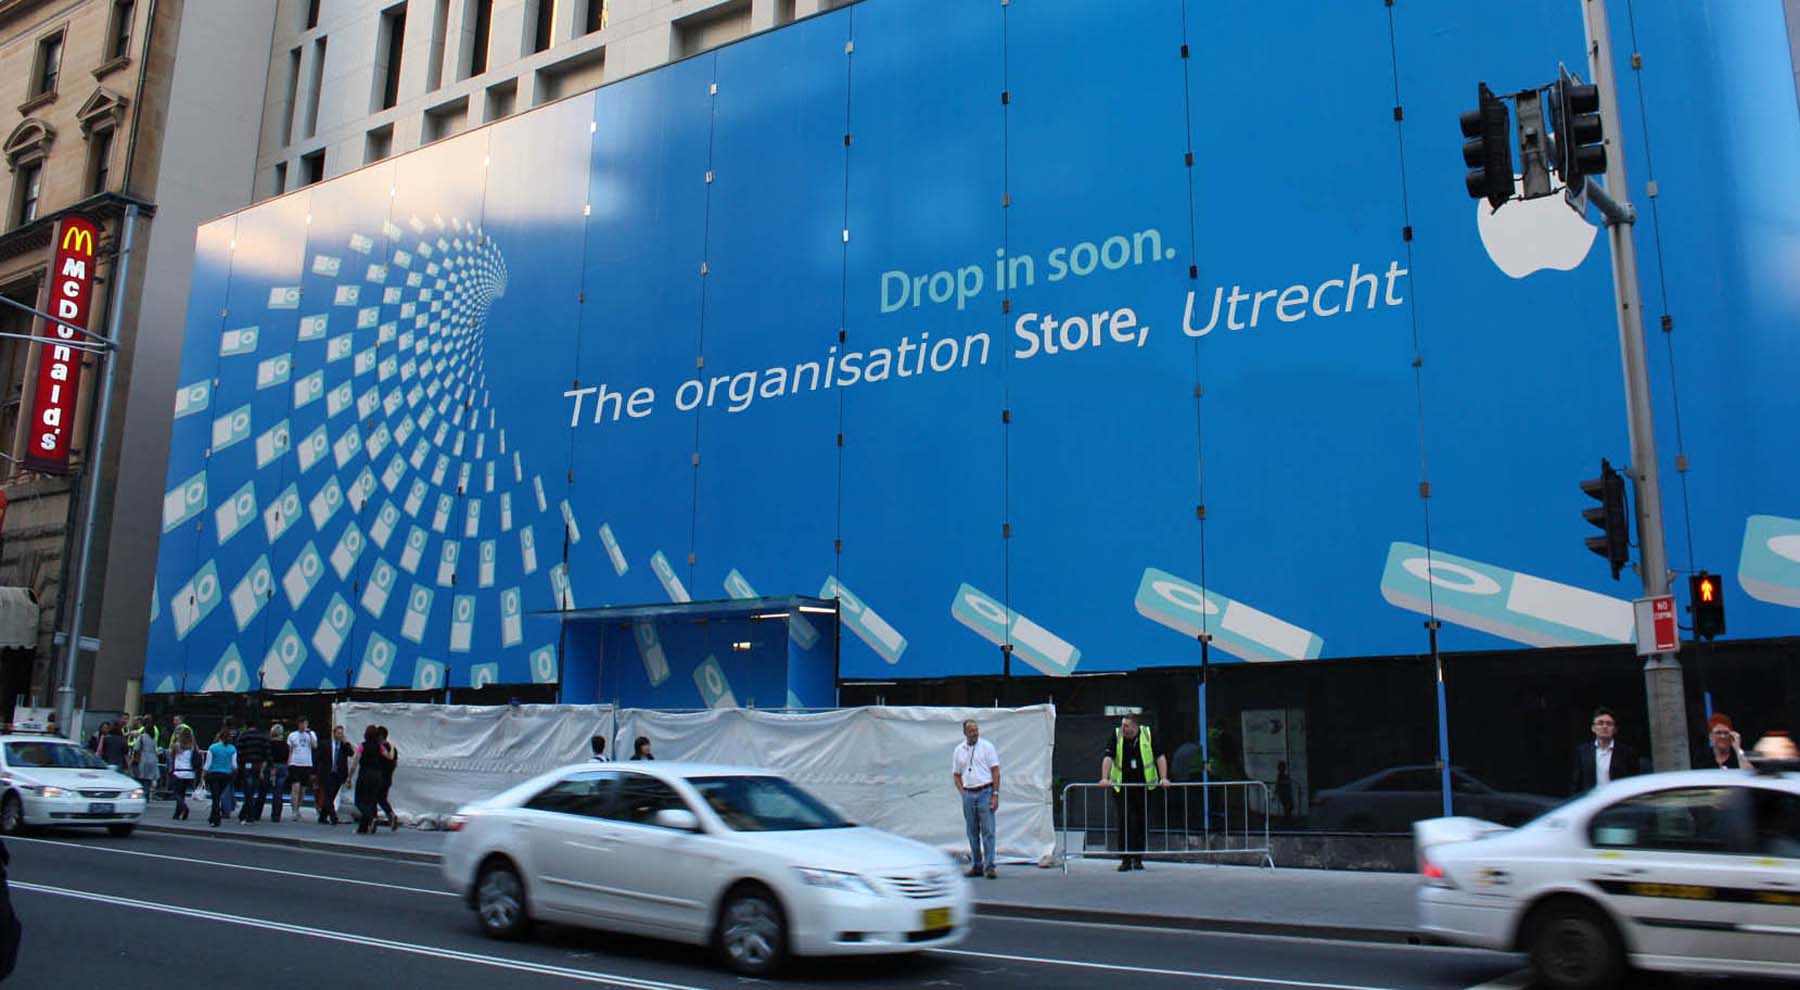 The organisation store 2012